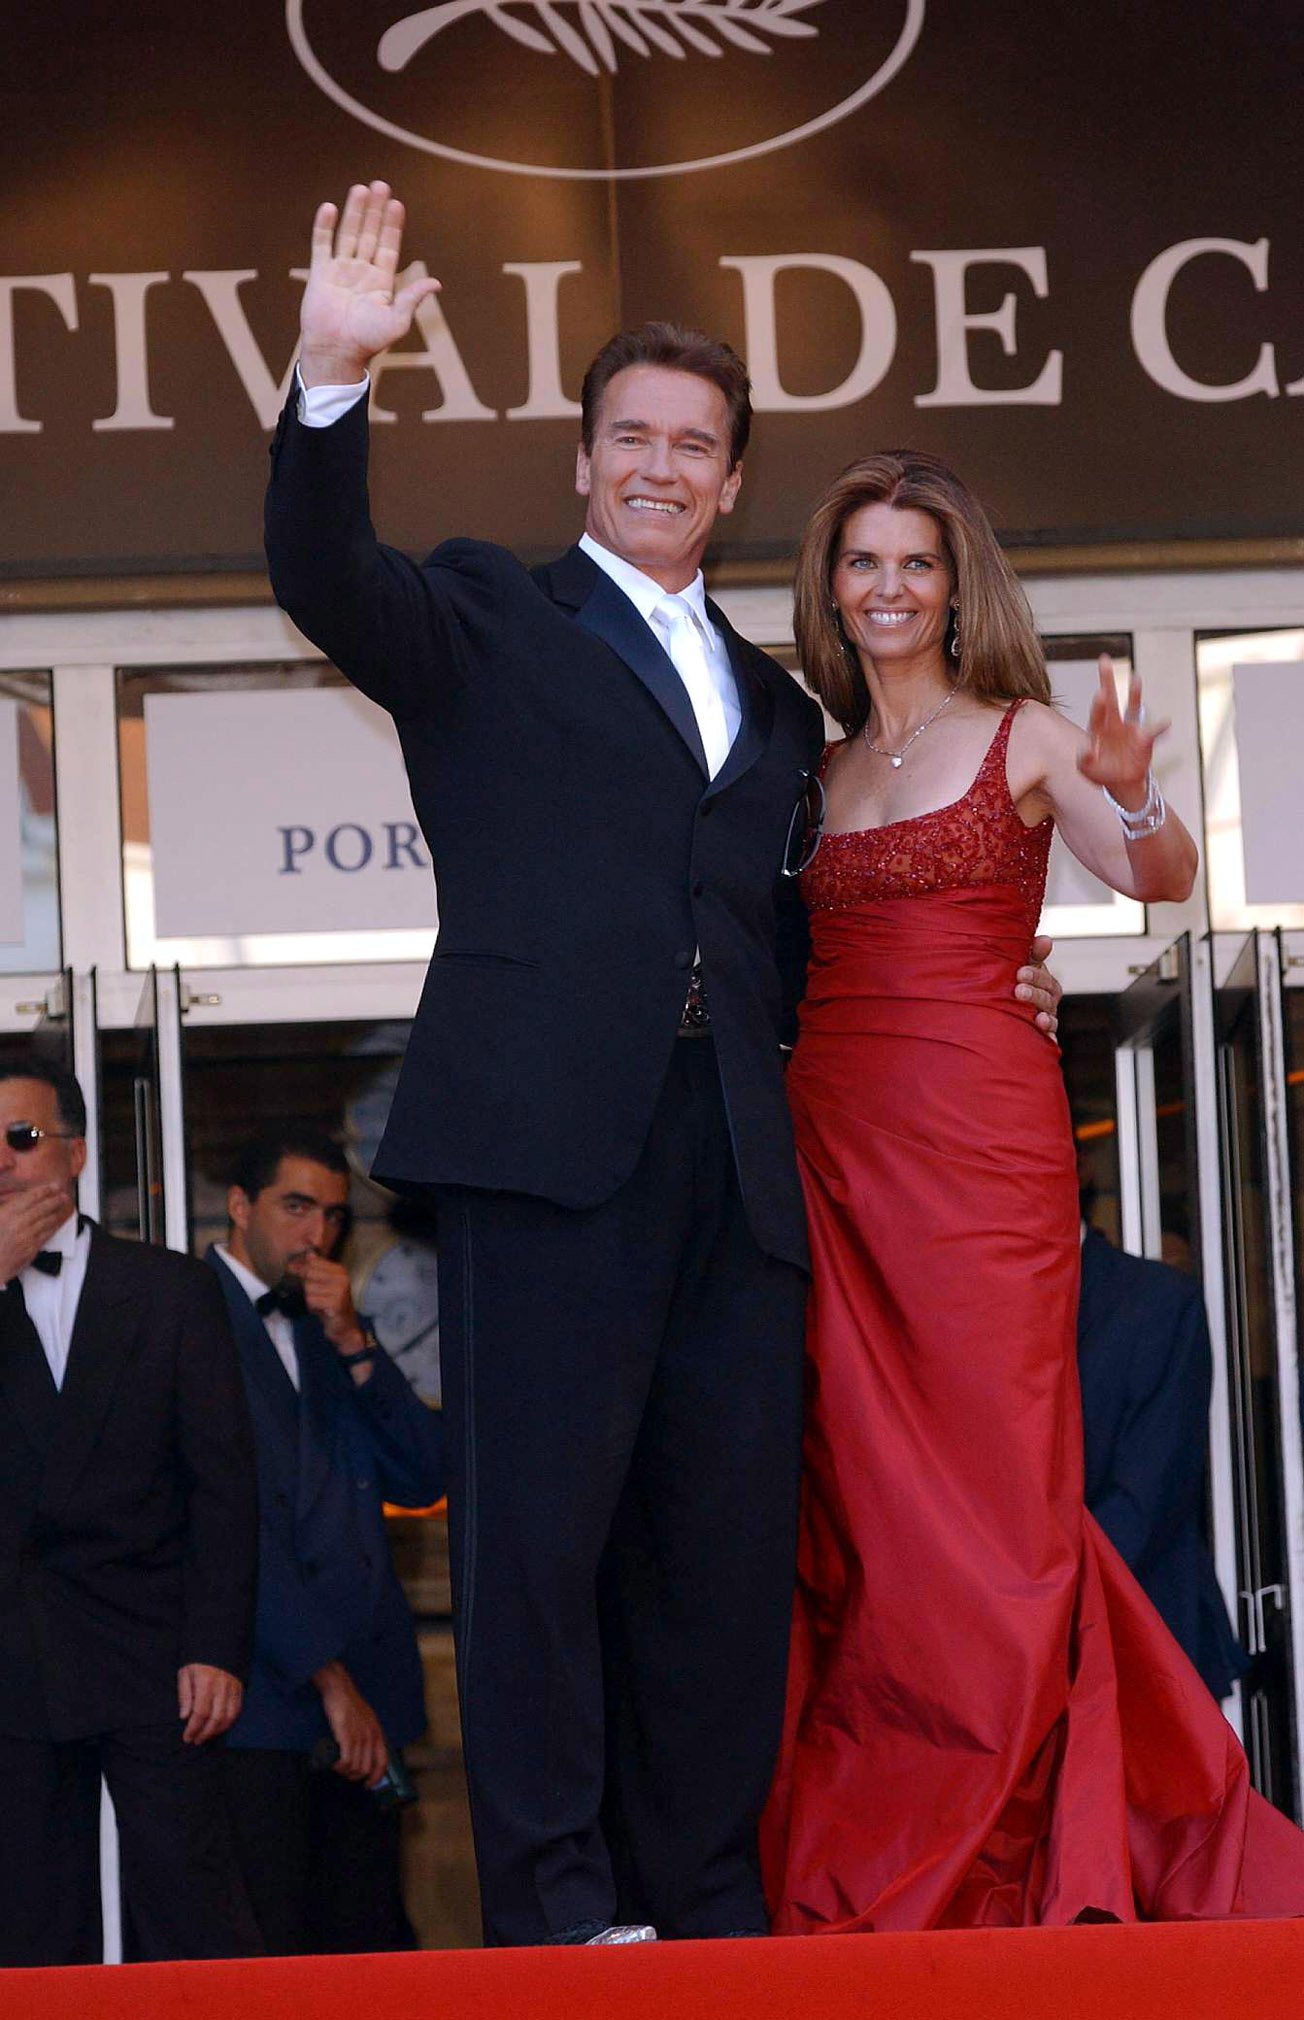 Actor Arnold Schwarzenegger and his wife, journalist Maria Shriver, pictured arriving at the premiere of the French film "Les Egares" at the Palais des Festival in Cannes. | Source: Getty Images